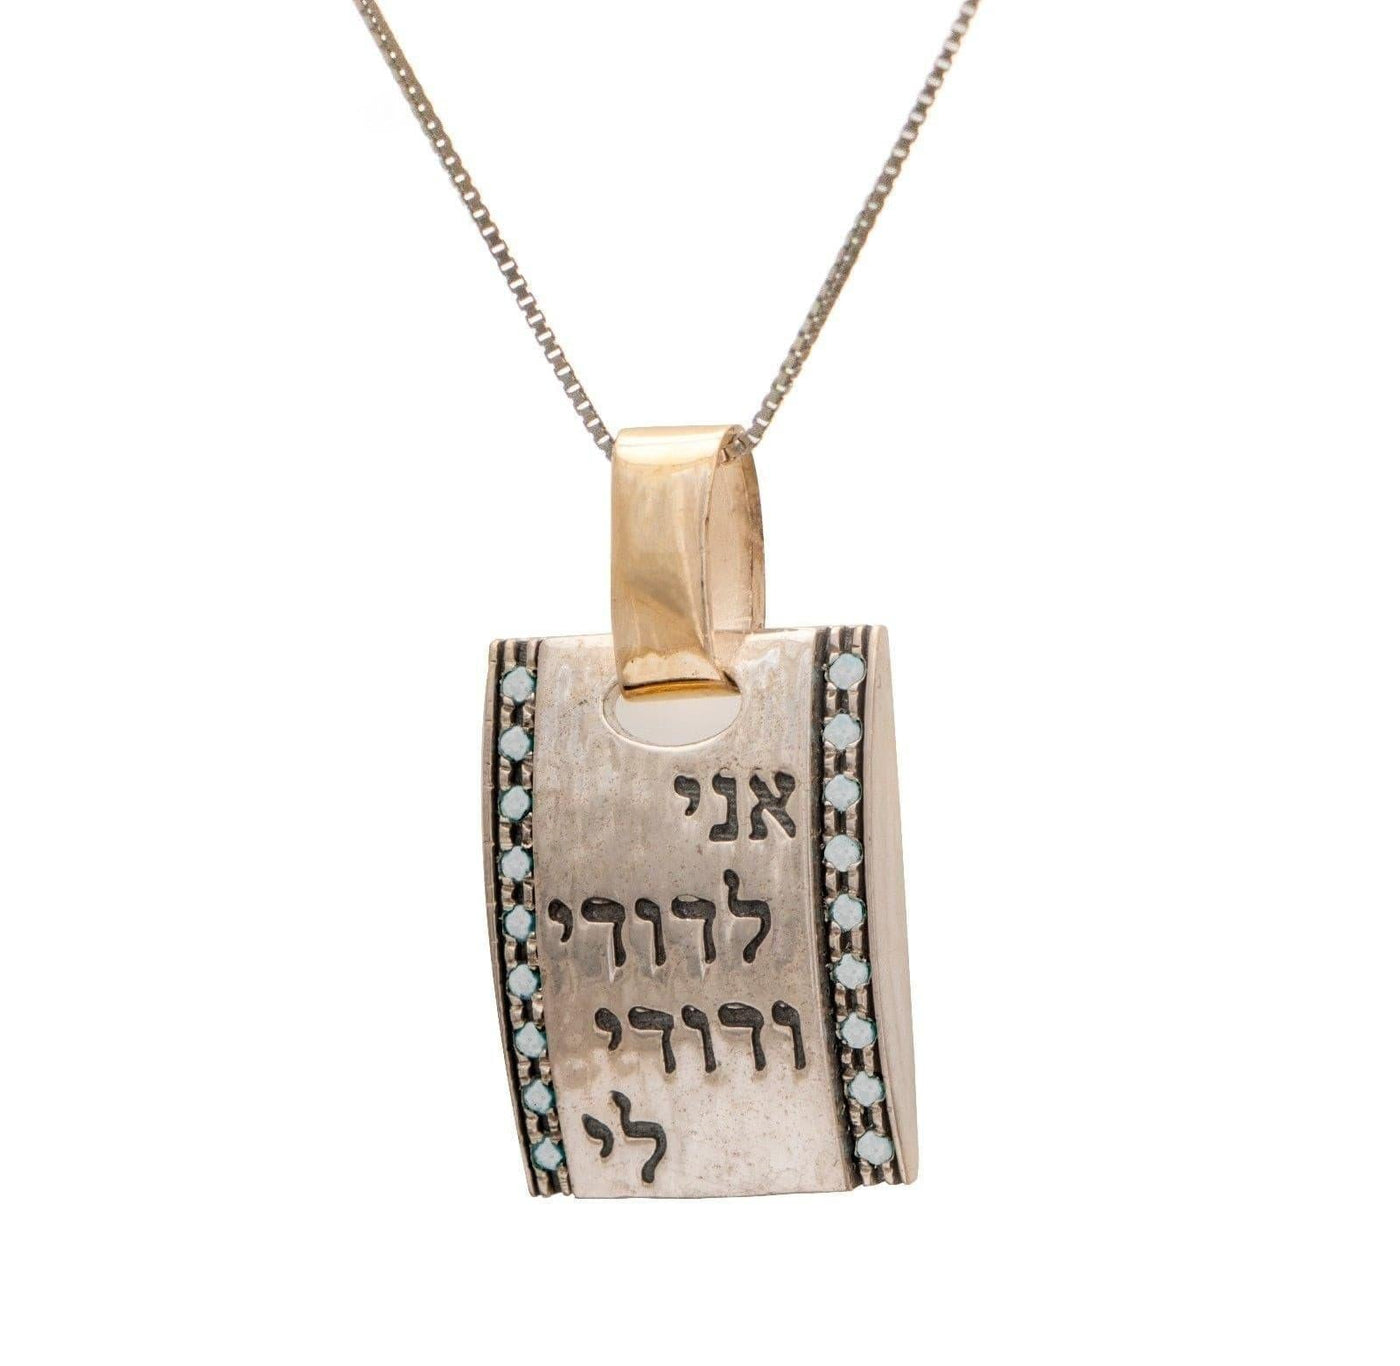 Gold and Silver Religious Necklace With Pendant with Hebrew BIBLE Quote.